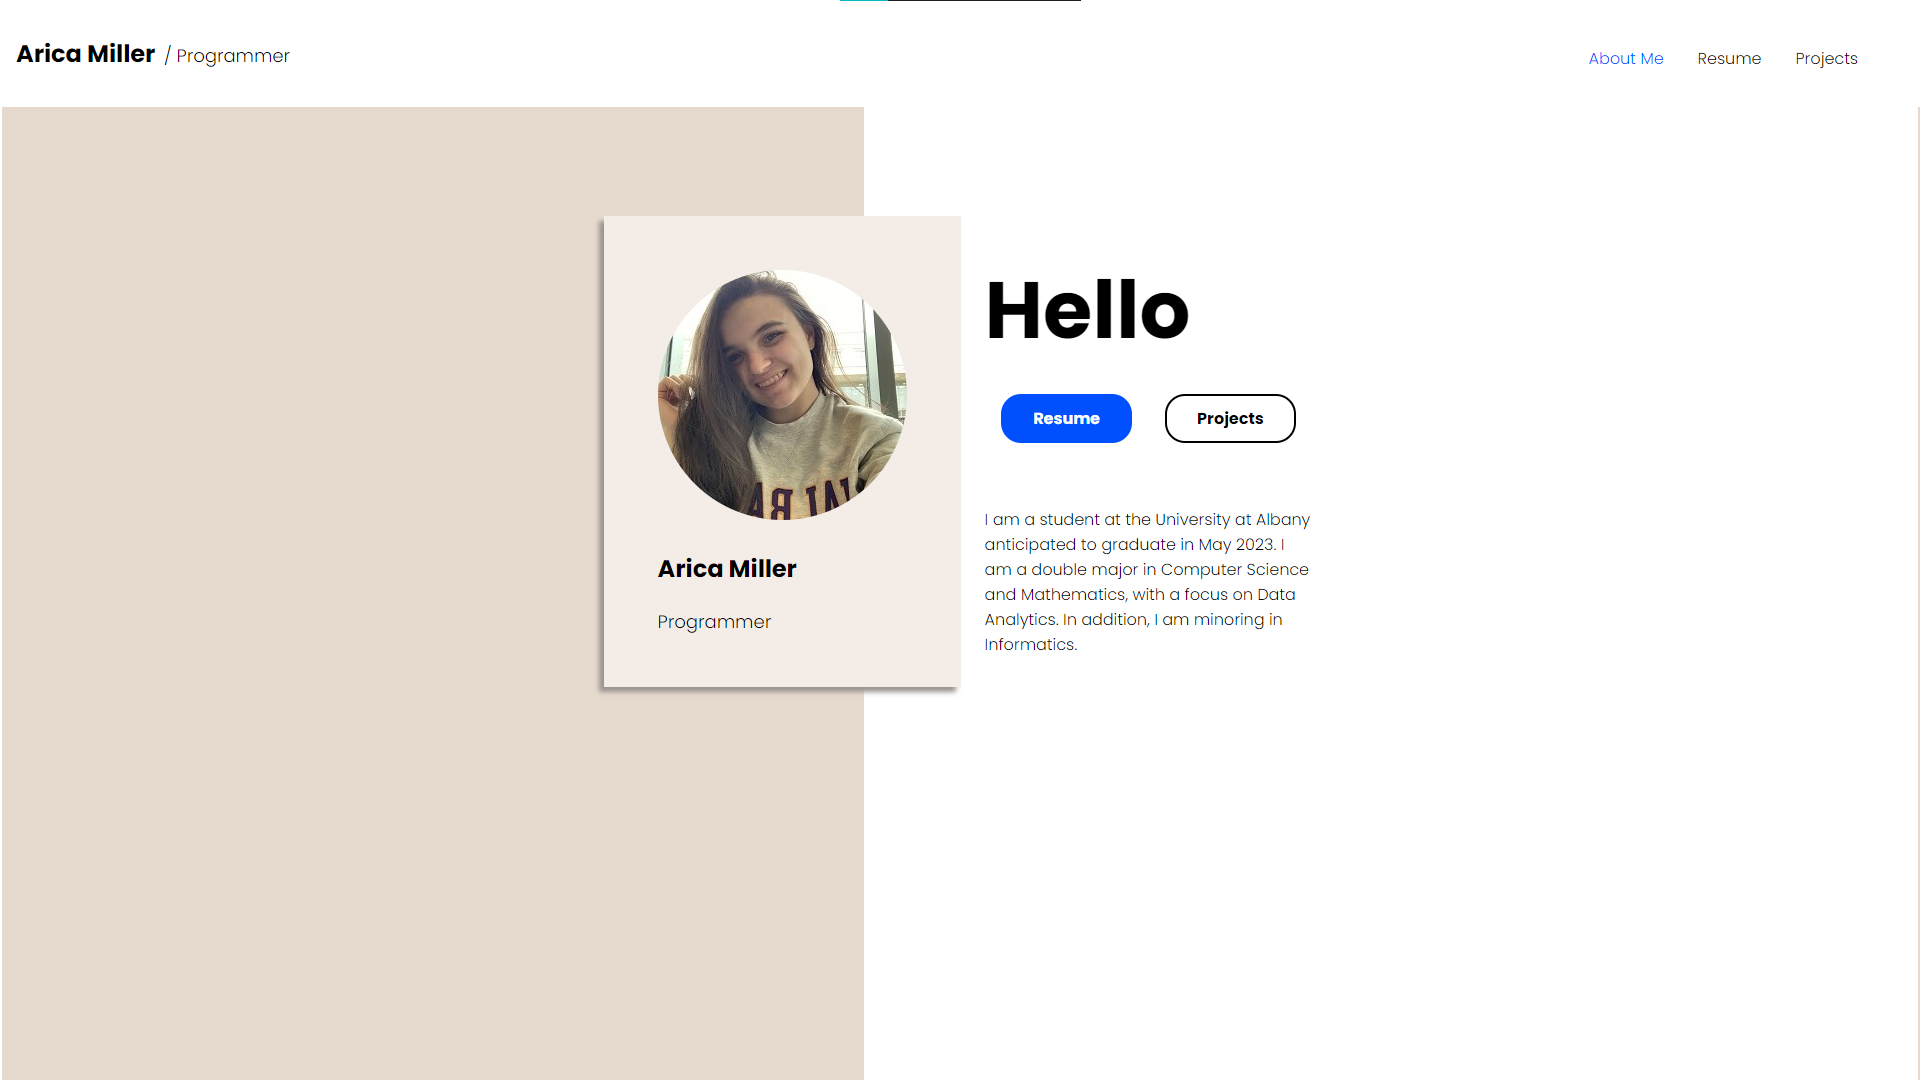 The About Me page of this website